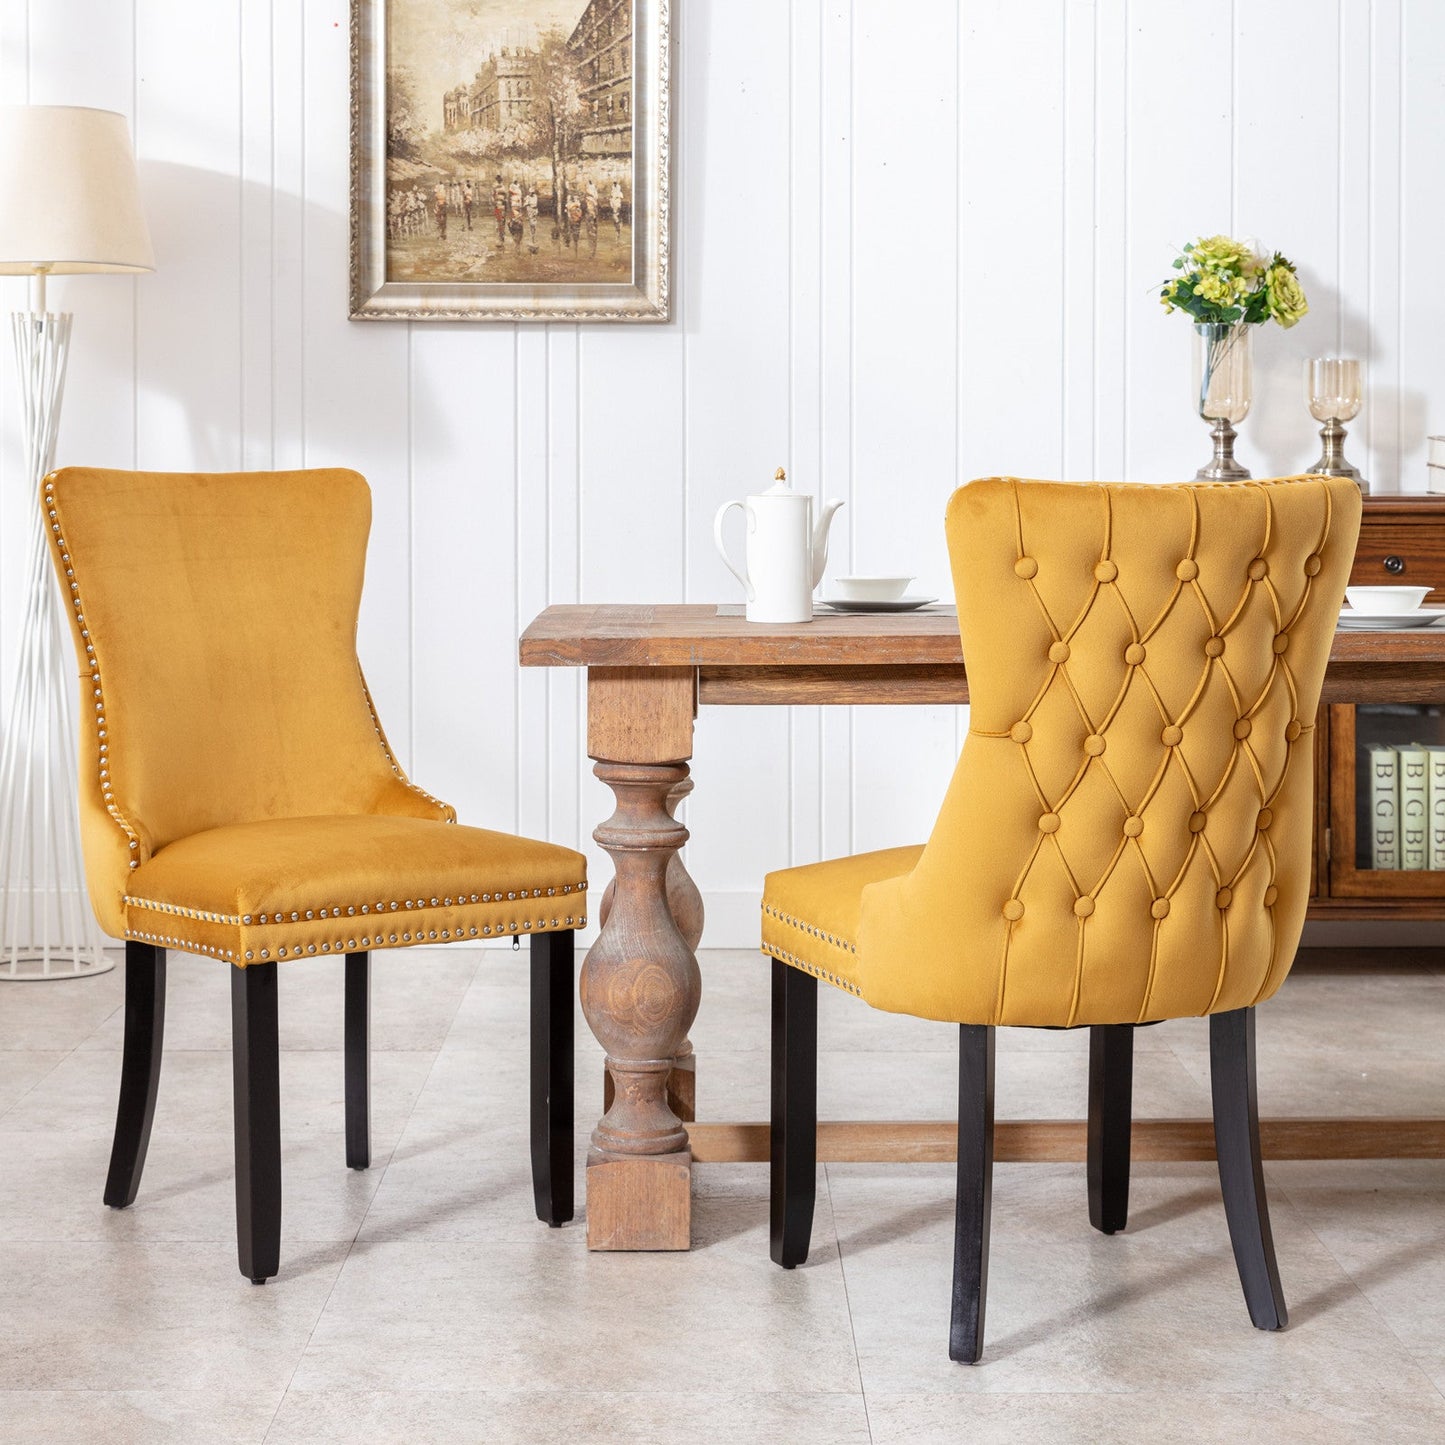 Upholstered Wing-Back Dining Chair with Backstitching Nailhead Trim and Solid Wood Legs,Set of 2, Gold - Demine Essentials